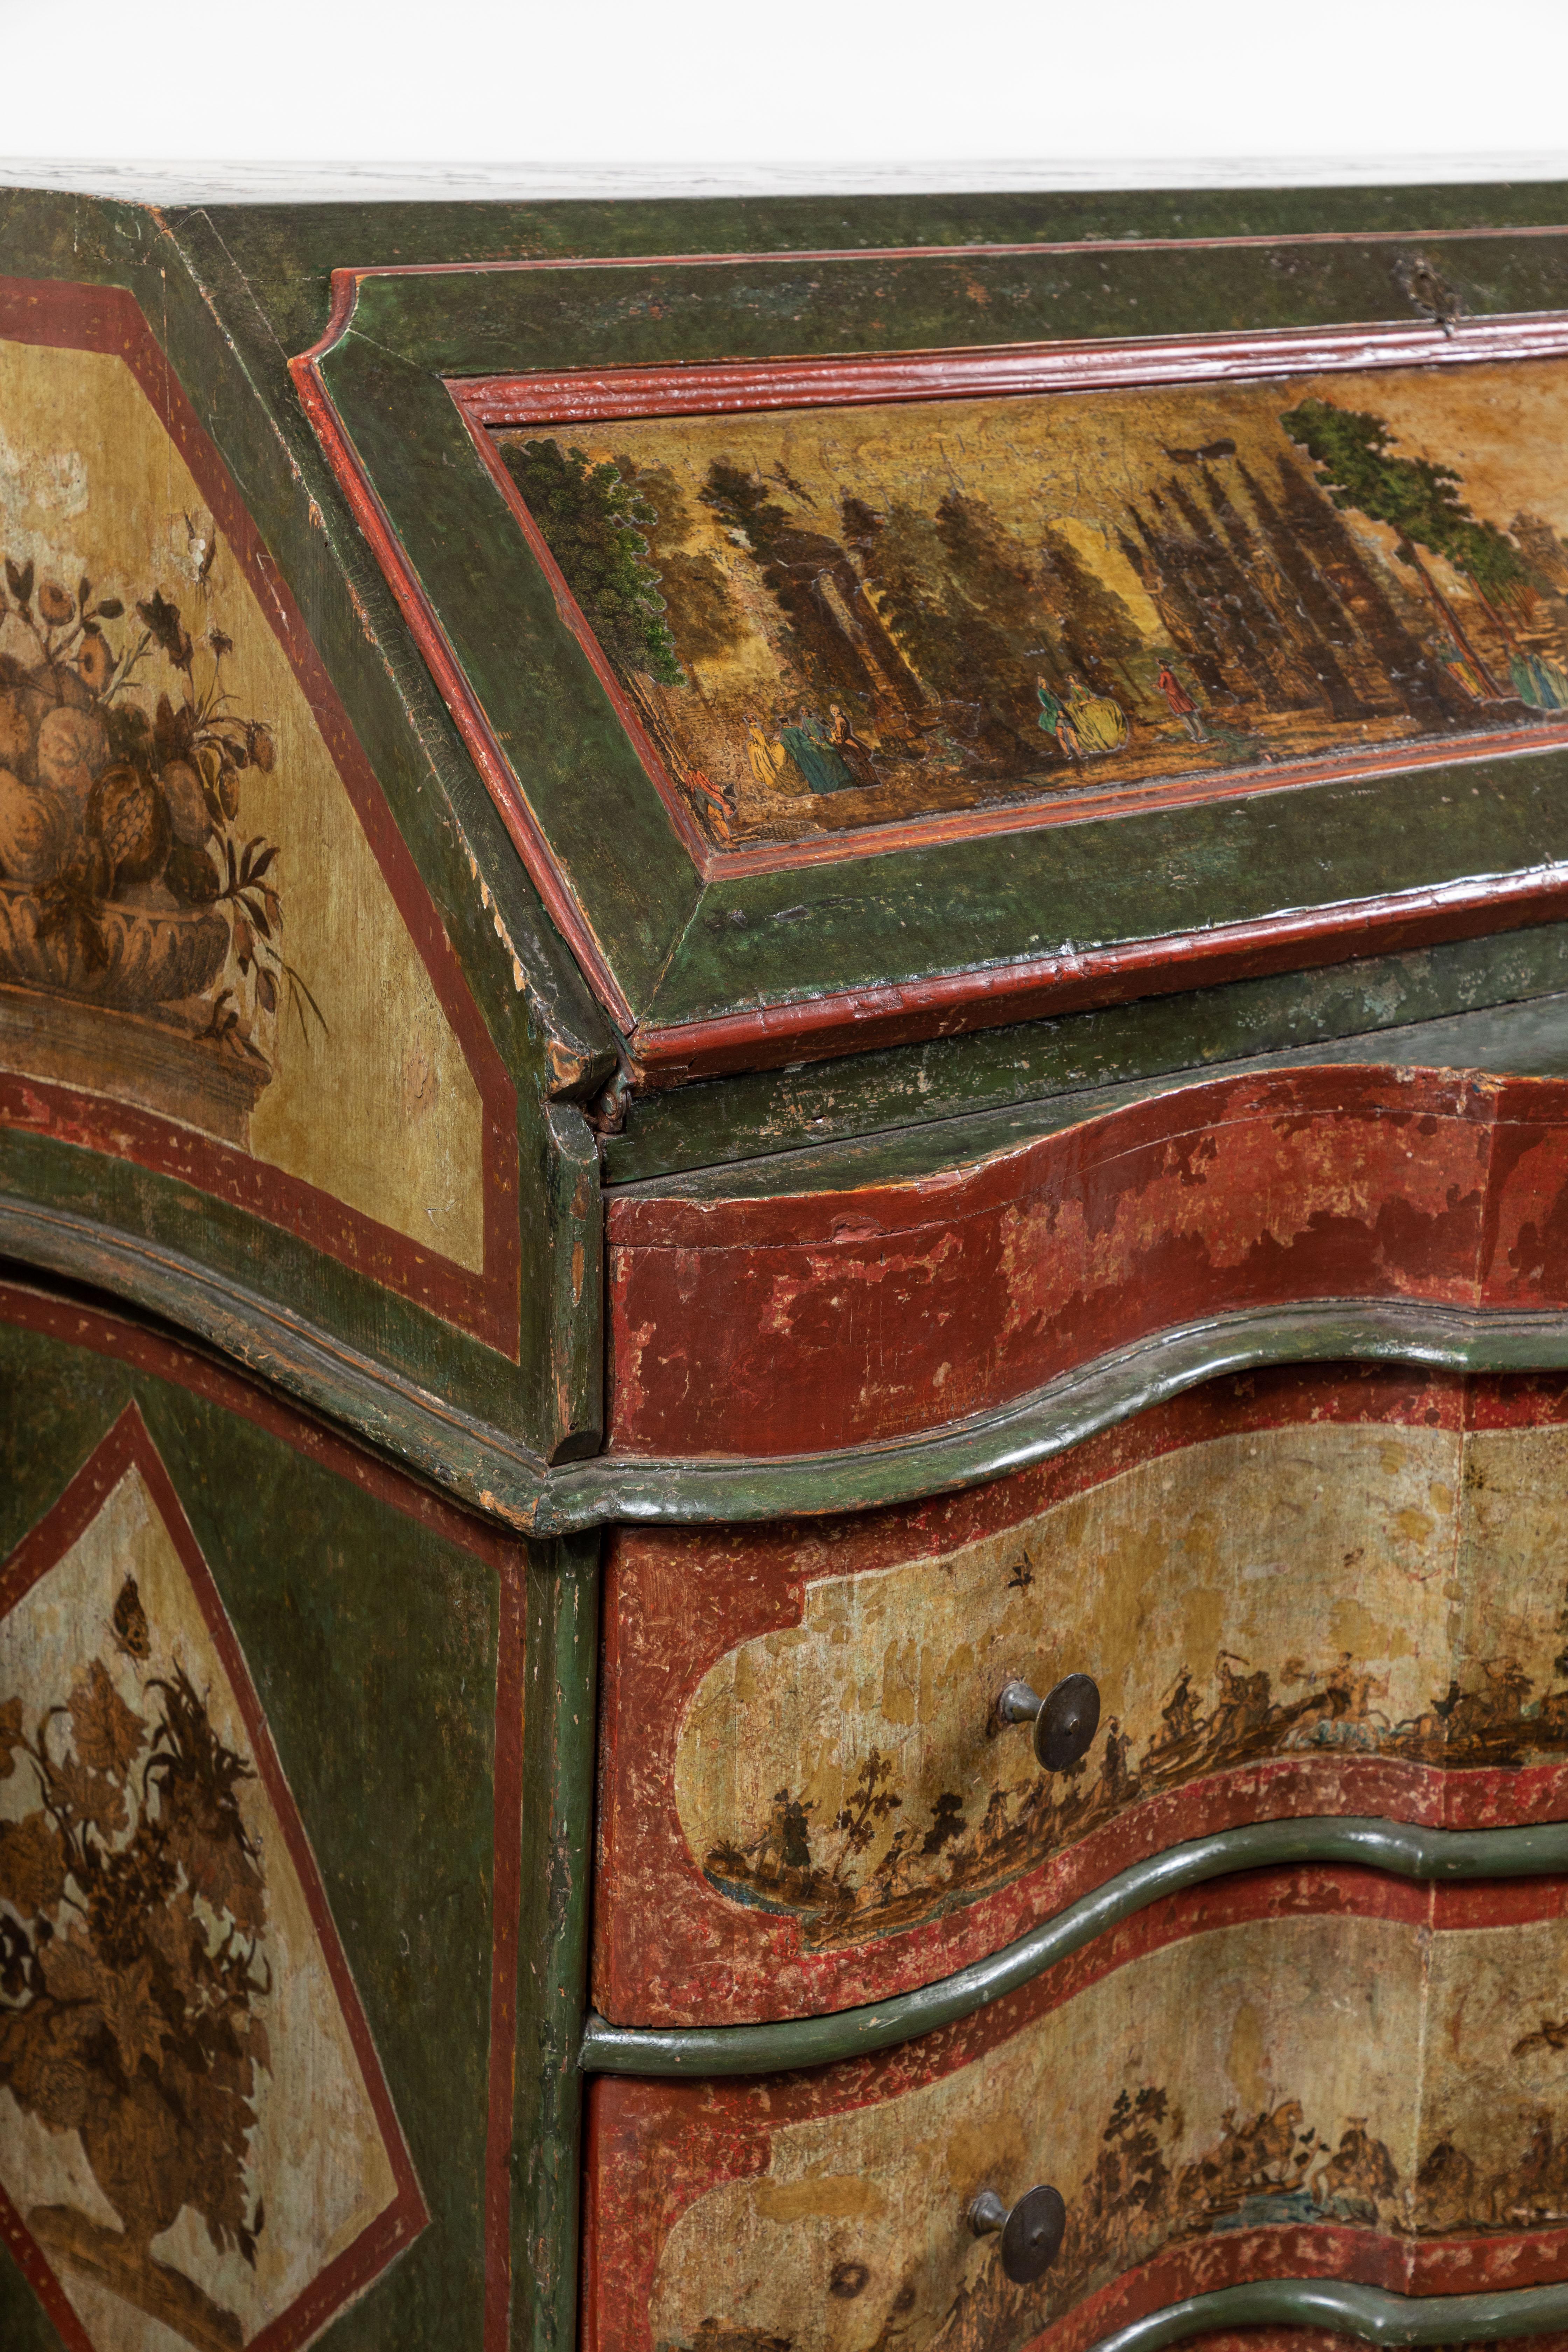 Richly colored, circa 1790, three-drawer, serpentine, fall front desk from Sicily. The whole covered in decoupage featuring panels of fruits, boughs of flowers, insects, soldiers on the march, and capriccio scenes of nobility in landscapes with